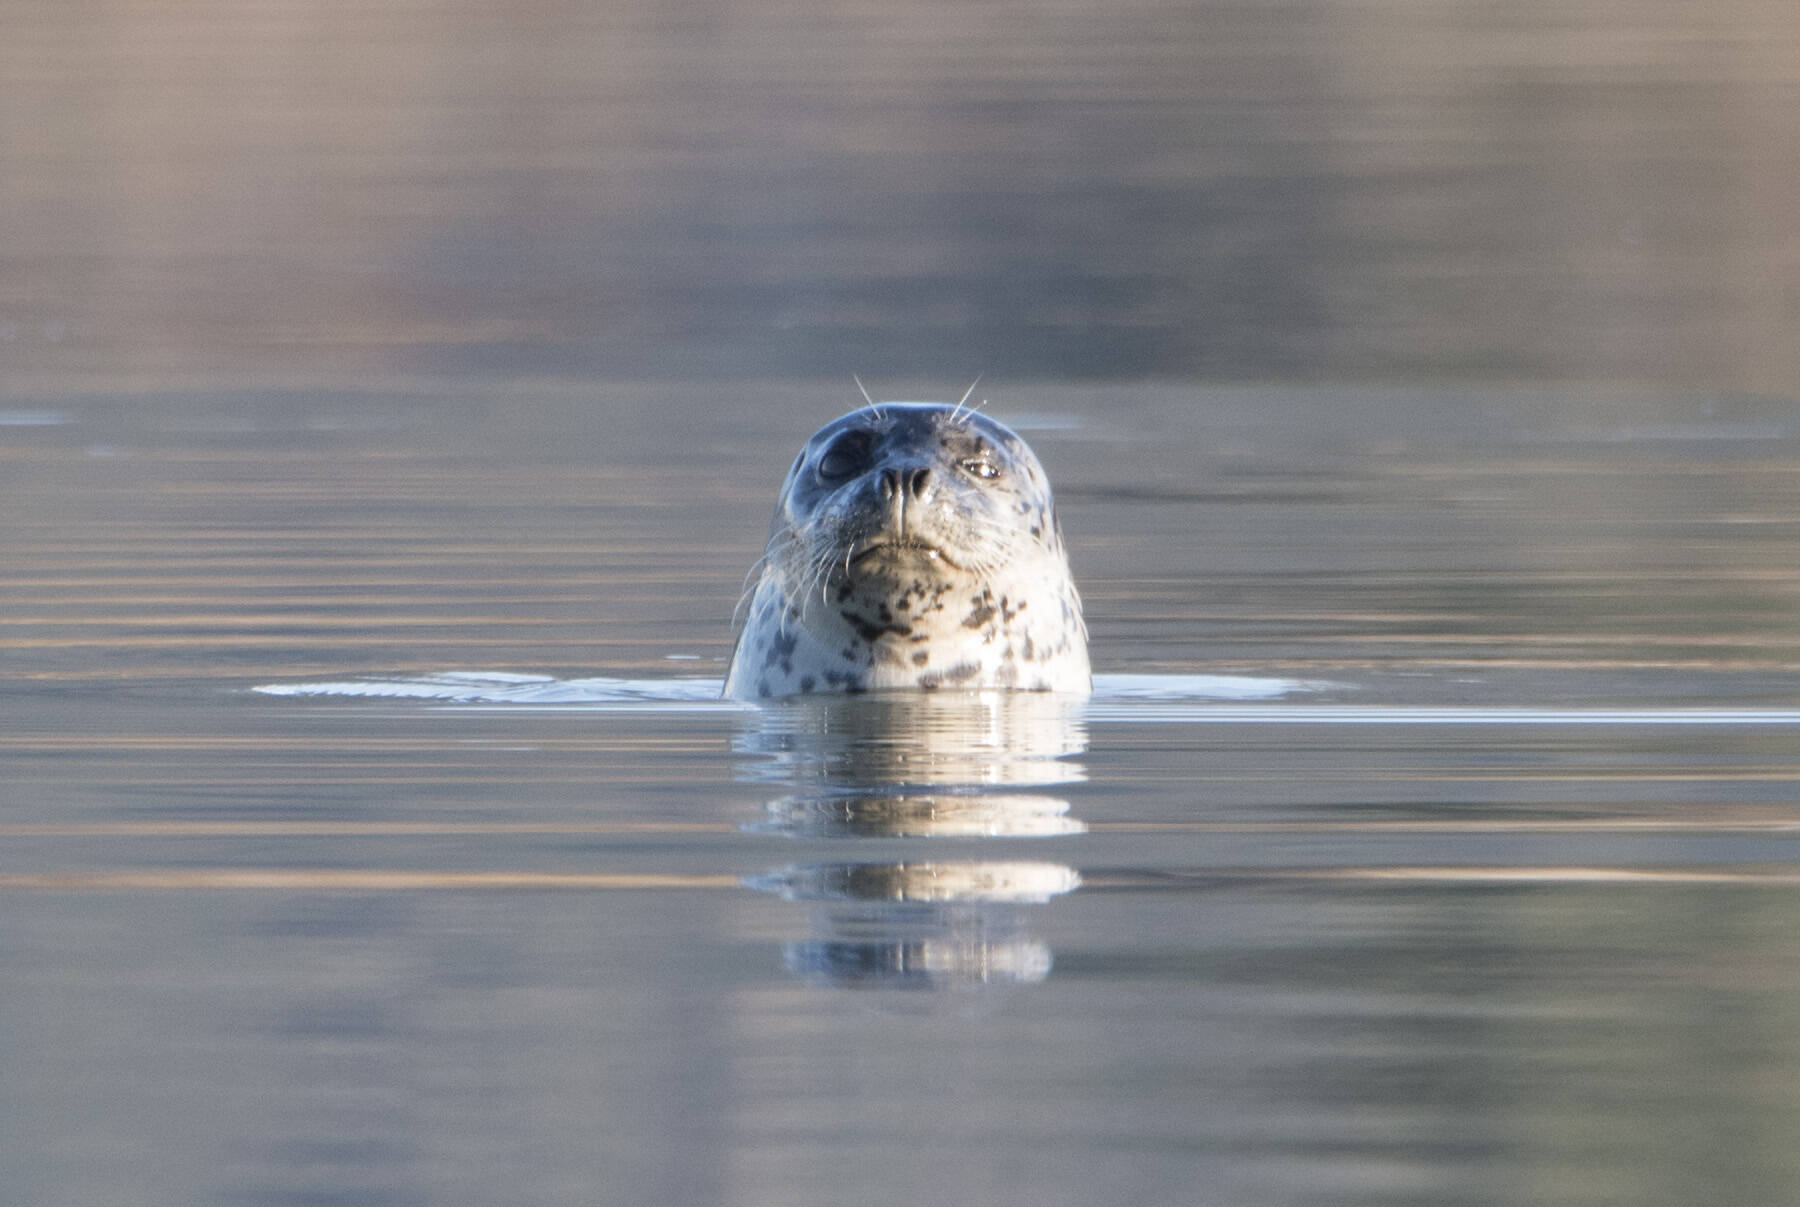 Harbor Seal watch at the Mendenhall Wetlands. (Courtesy Photo / Kenneth Gill, gillfoto)